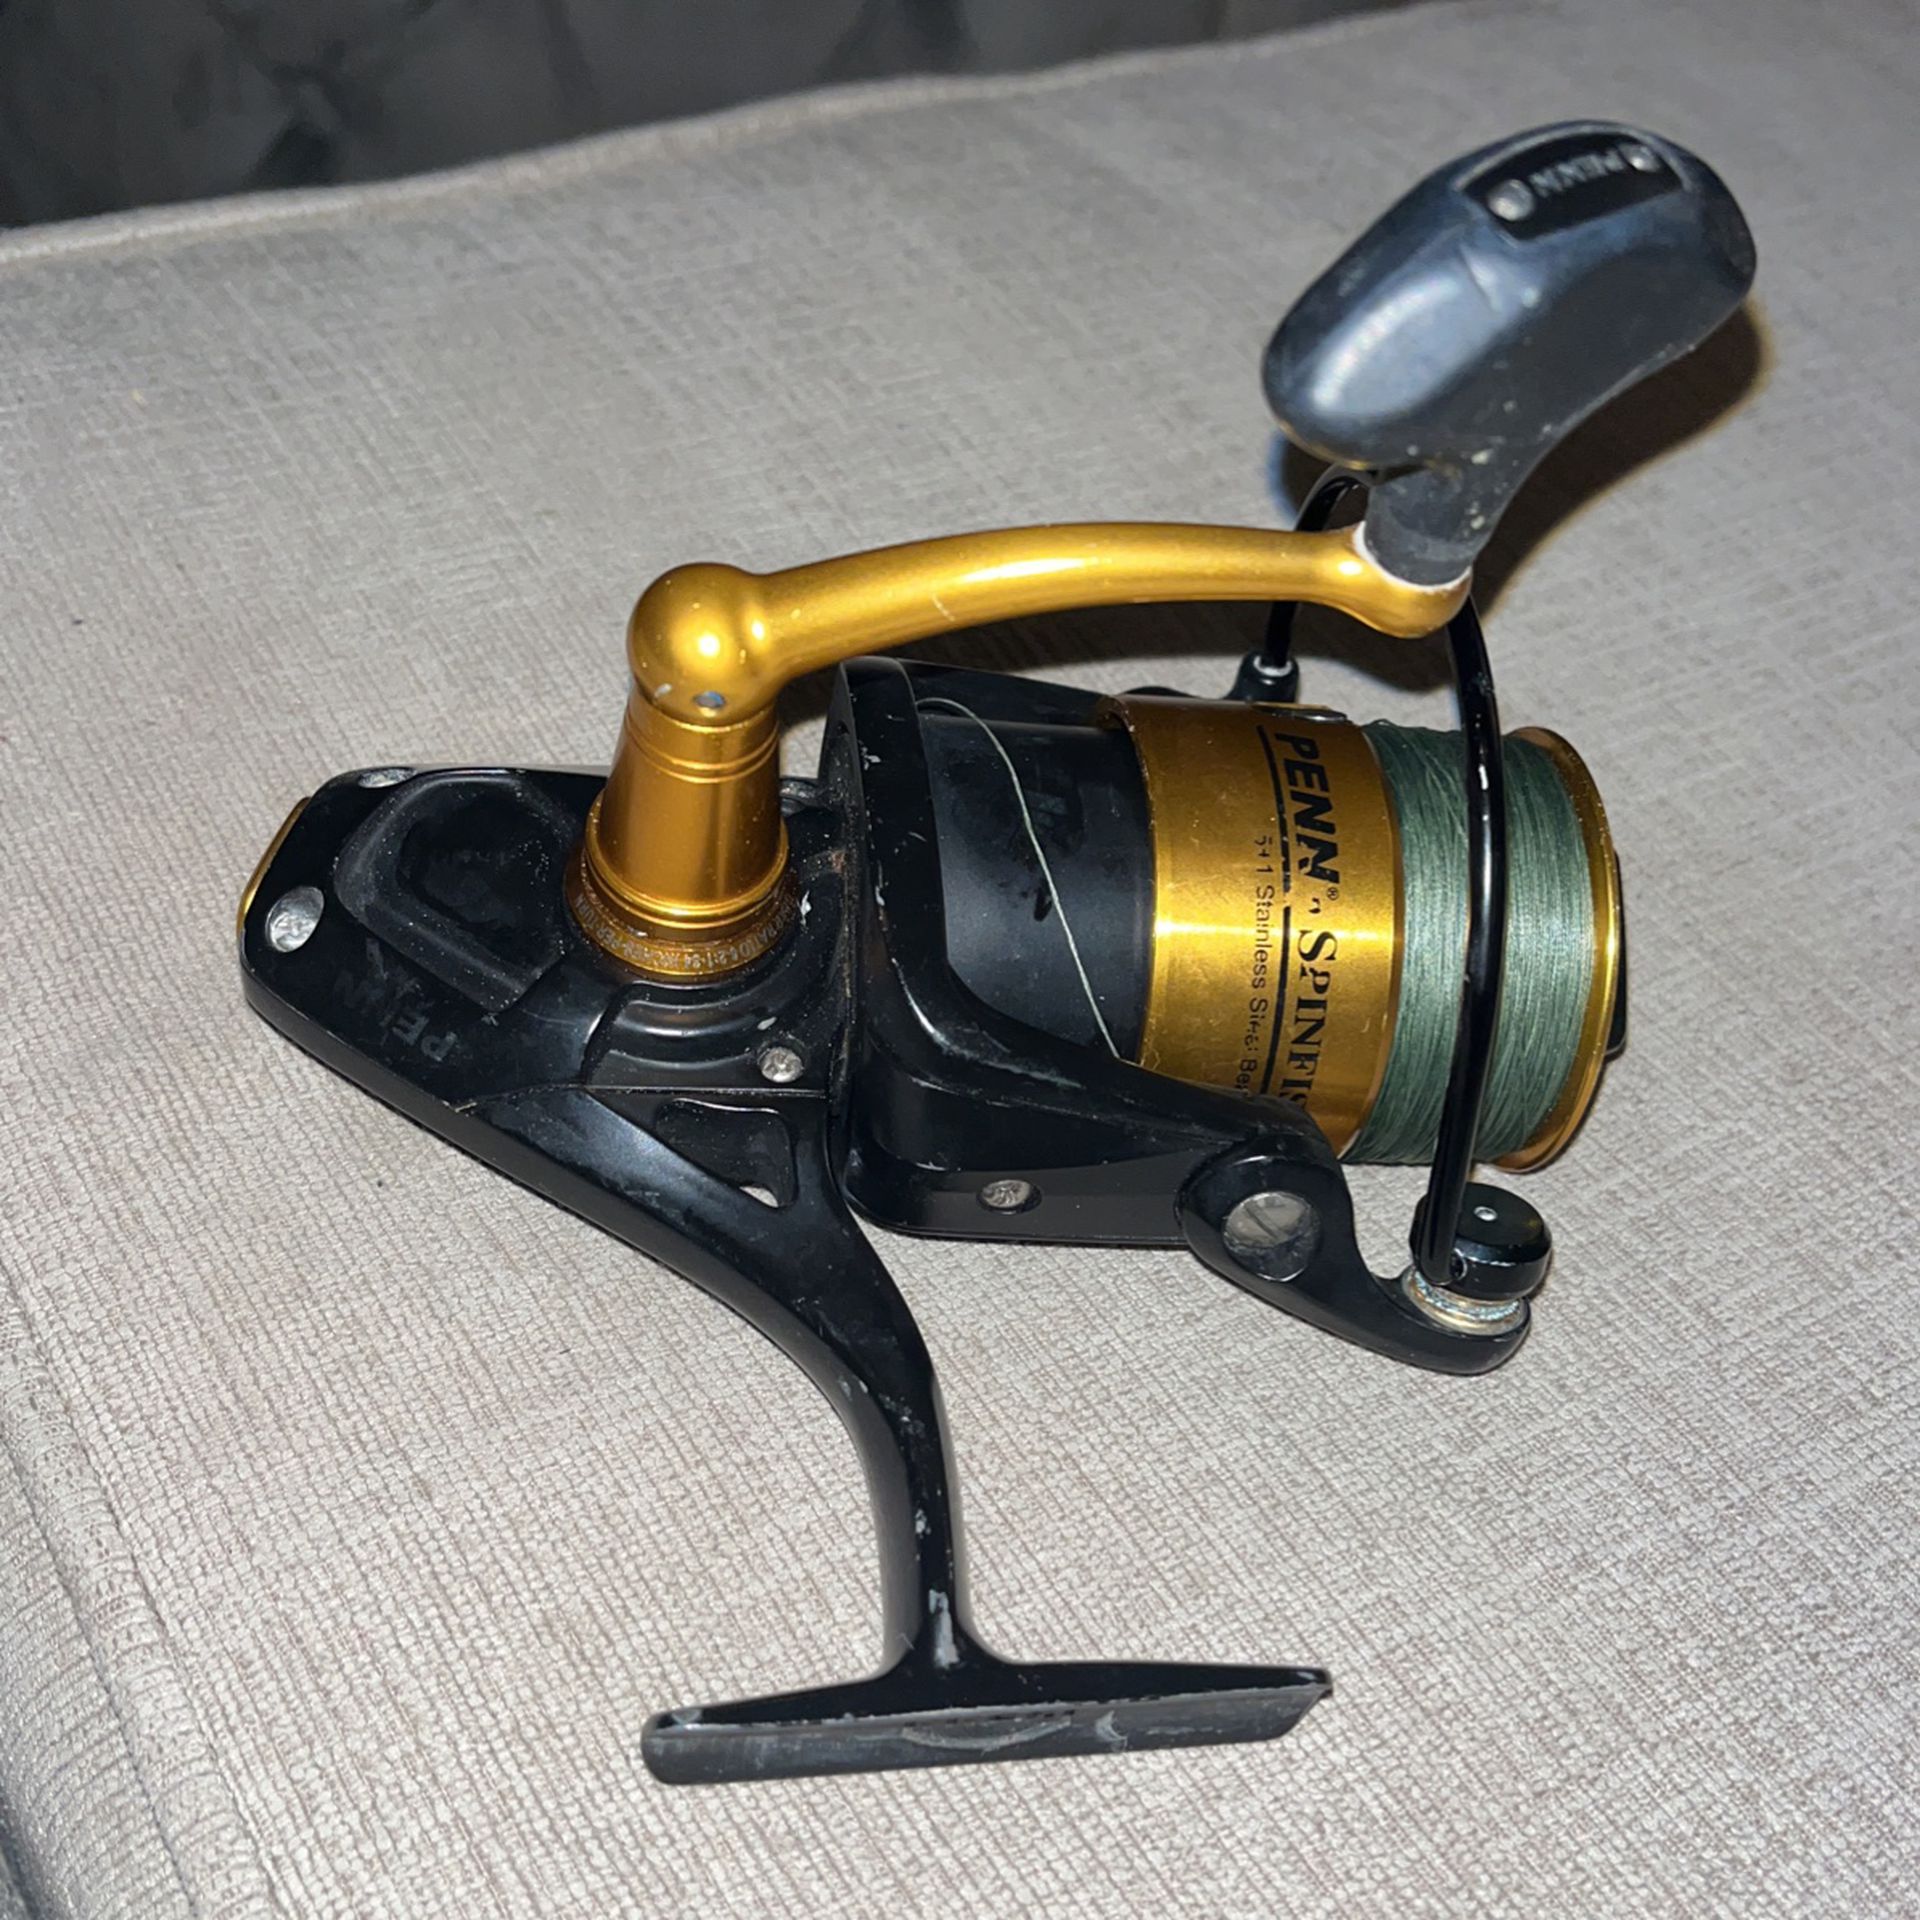 Penn Spinfisher V 4500 Fishing Reel for Sale in Englewd Clfs, NJ - OfferUp